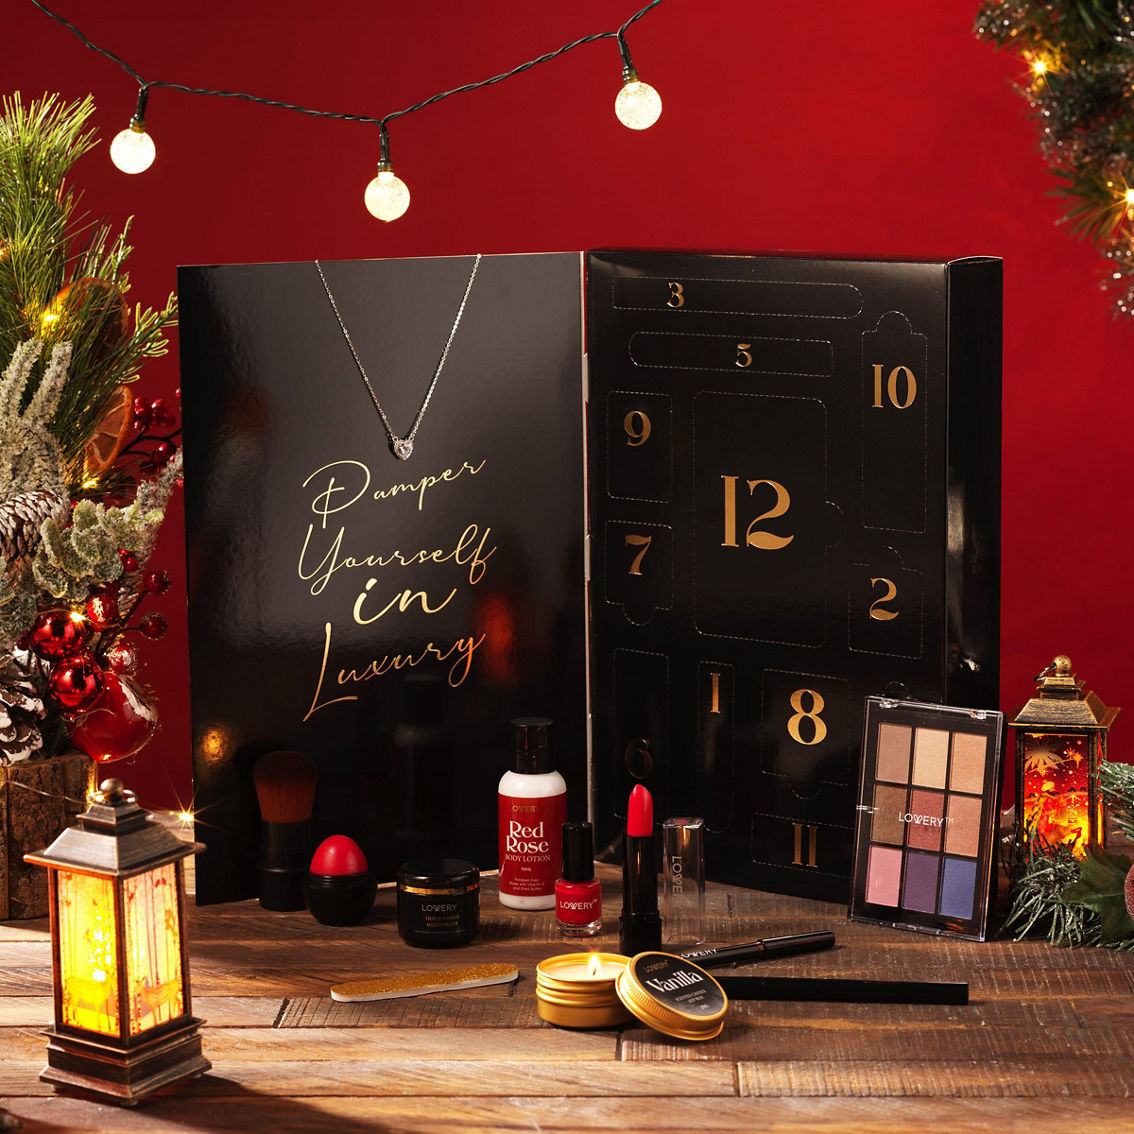 Lovery 12 Days Luxury Beauty Advent Calendar 22-Pc. Makeup & Skincare Gift Set - Image 2 of 5